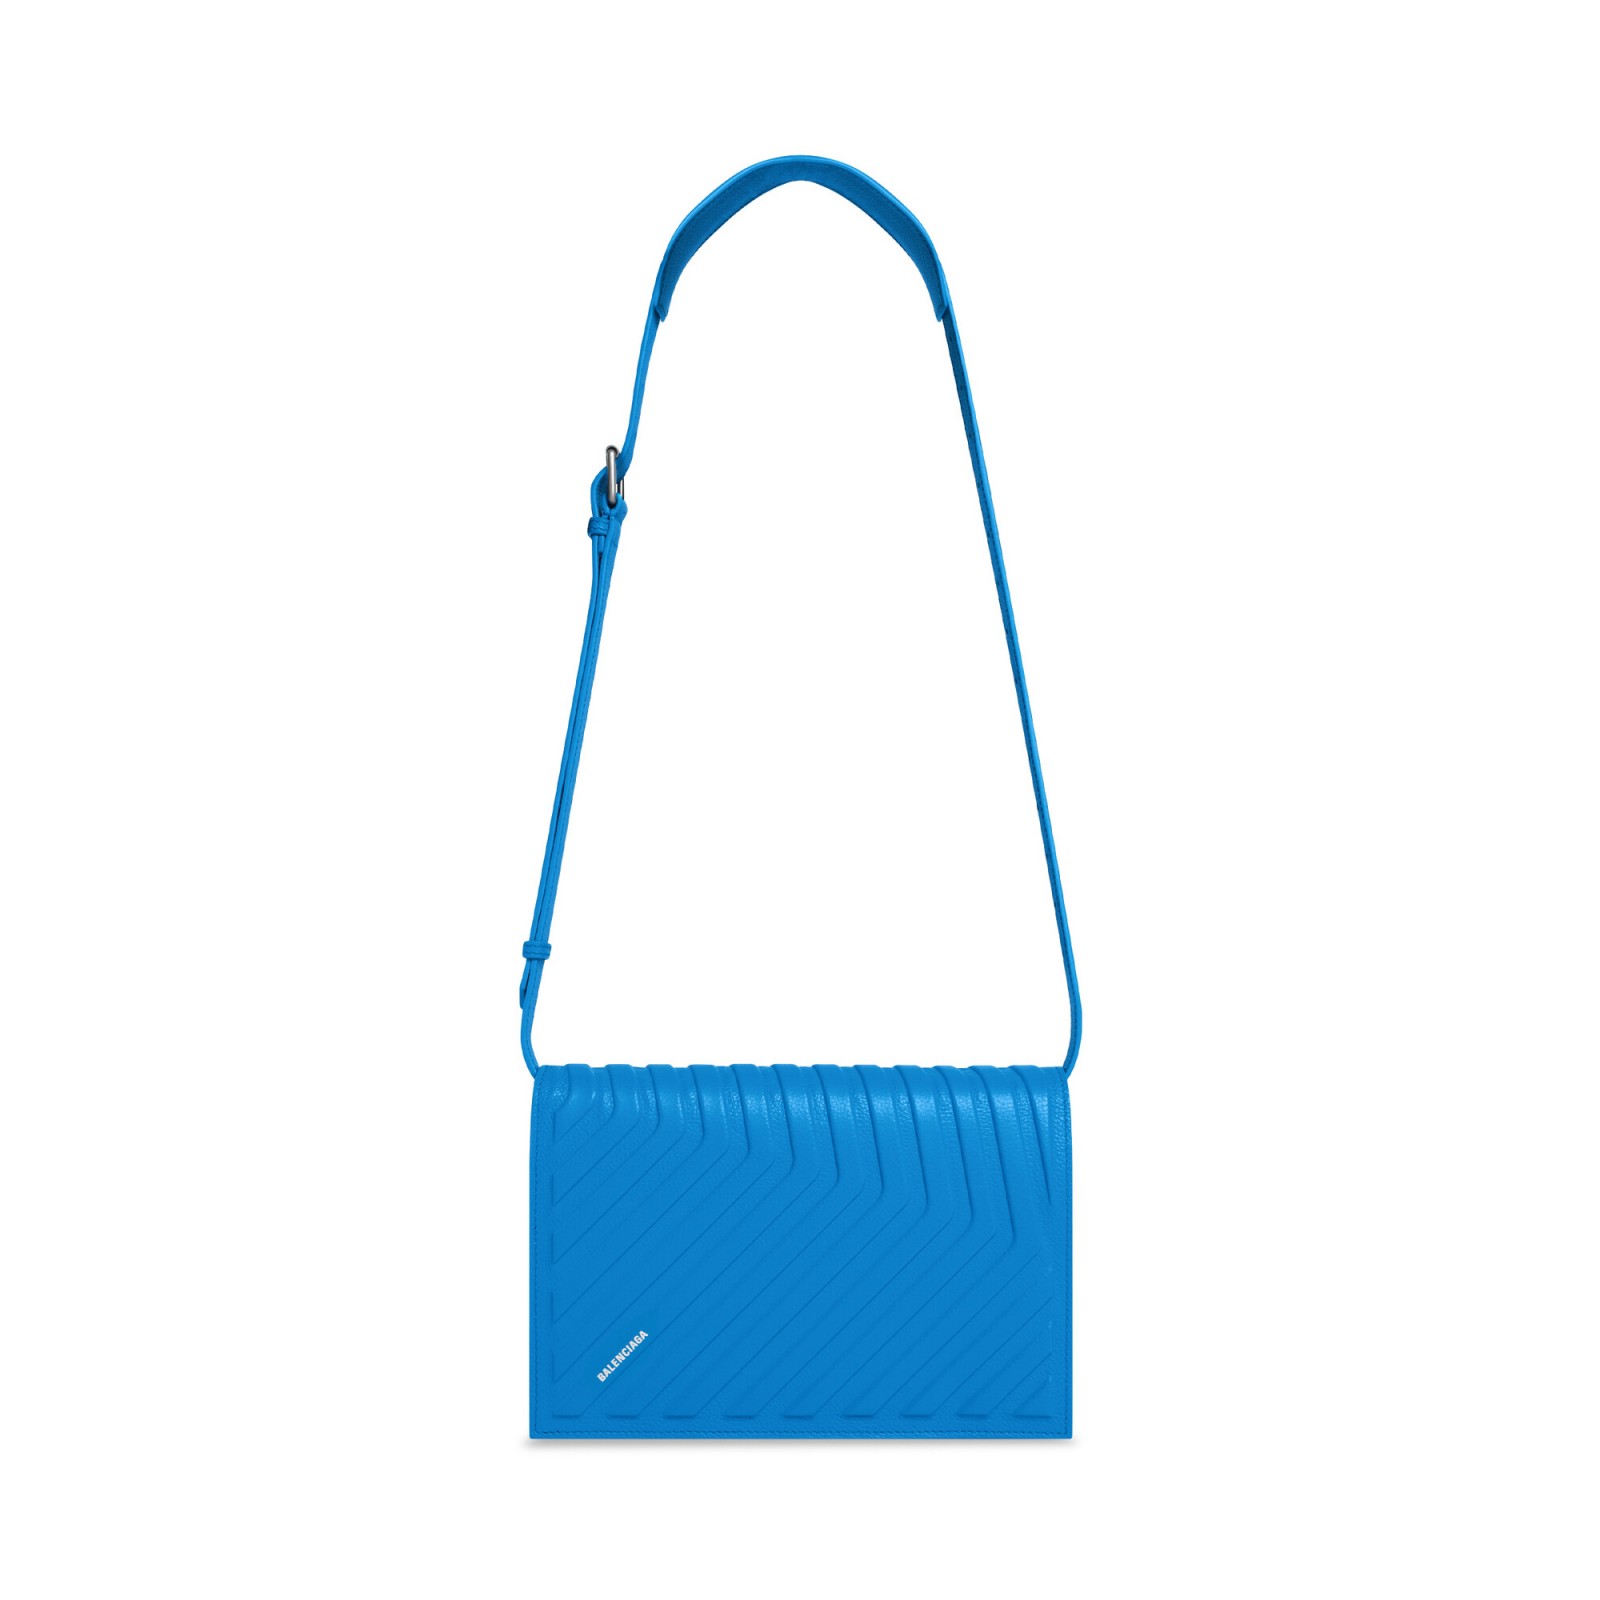 CAR FLAP BAG WITH STRAP